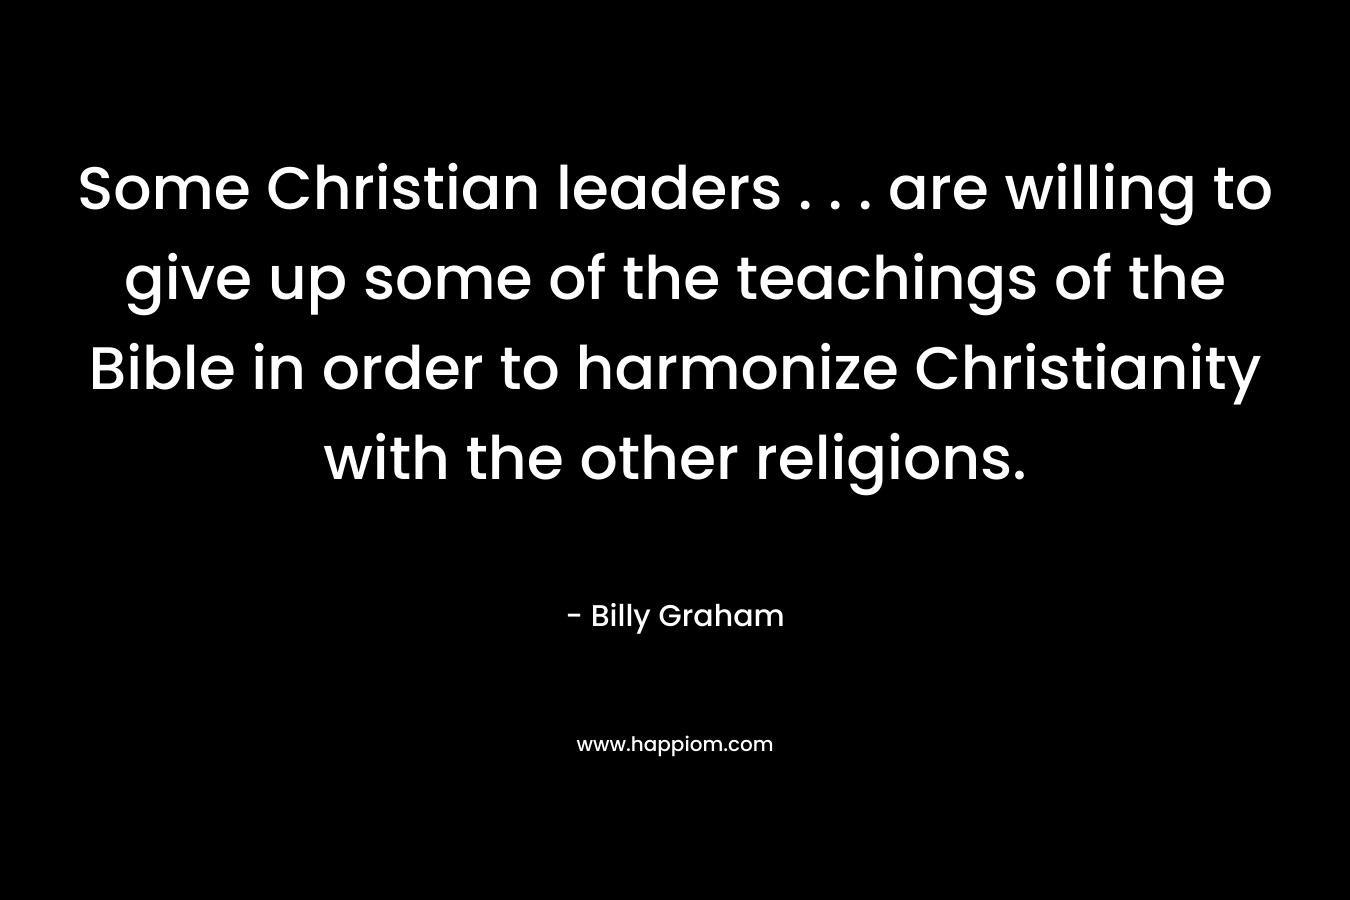 Some Christian leaders . . . are willing to give up some of the teachings of the Bible in order to harmonize Christianity with the other religions. – Billy Graham